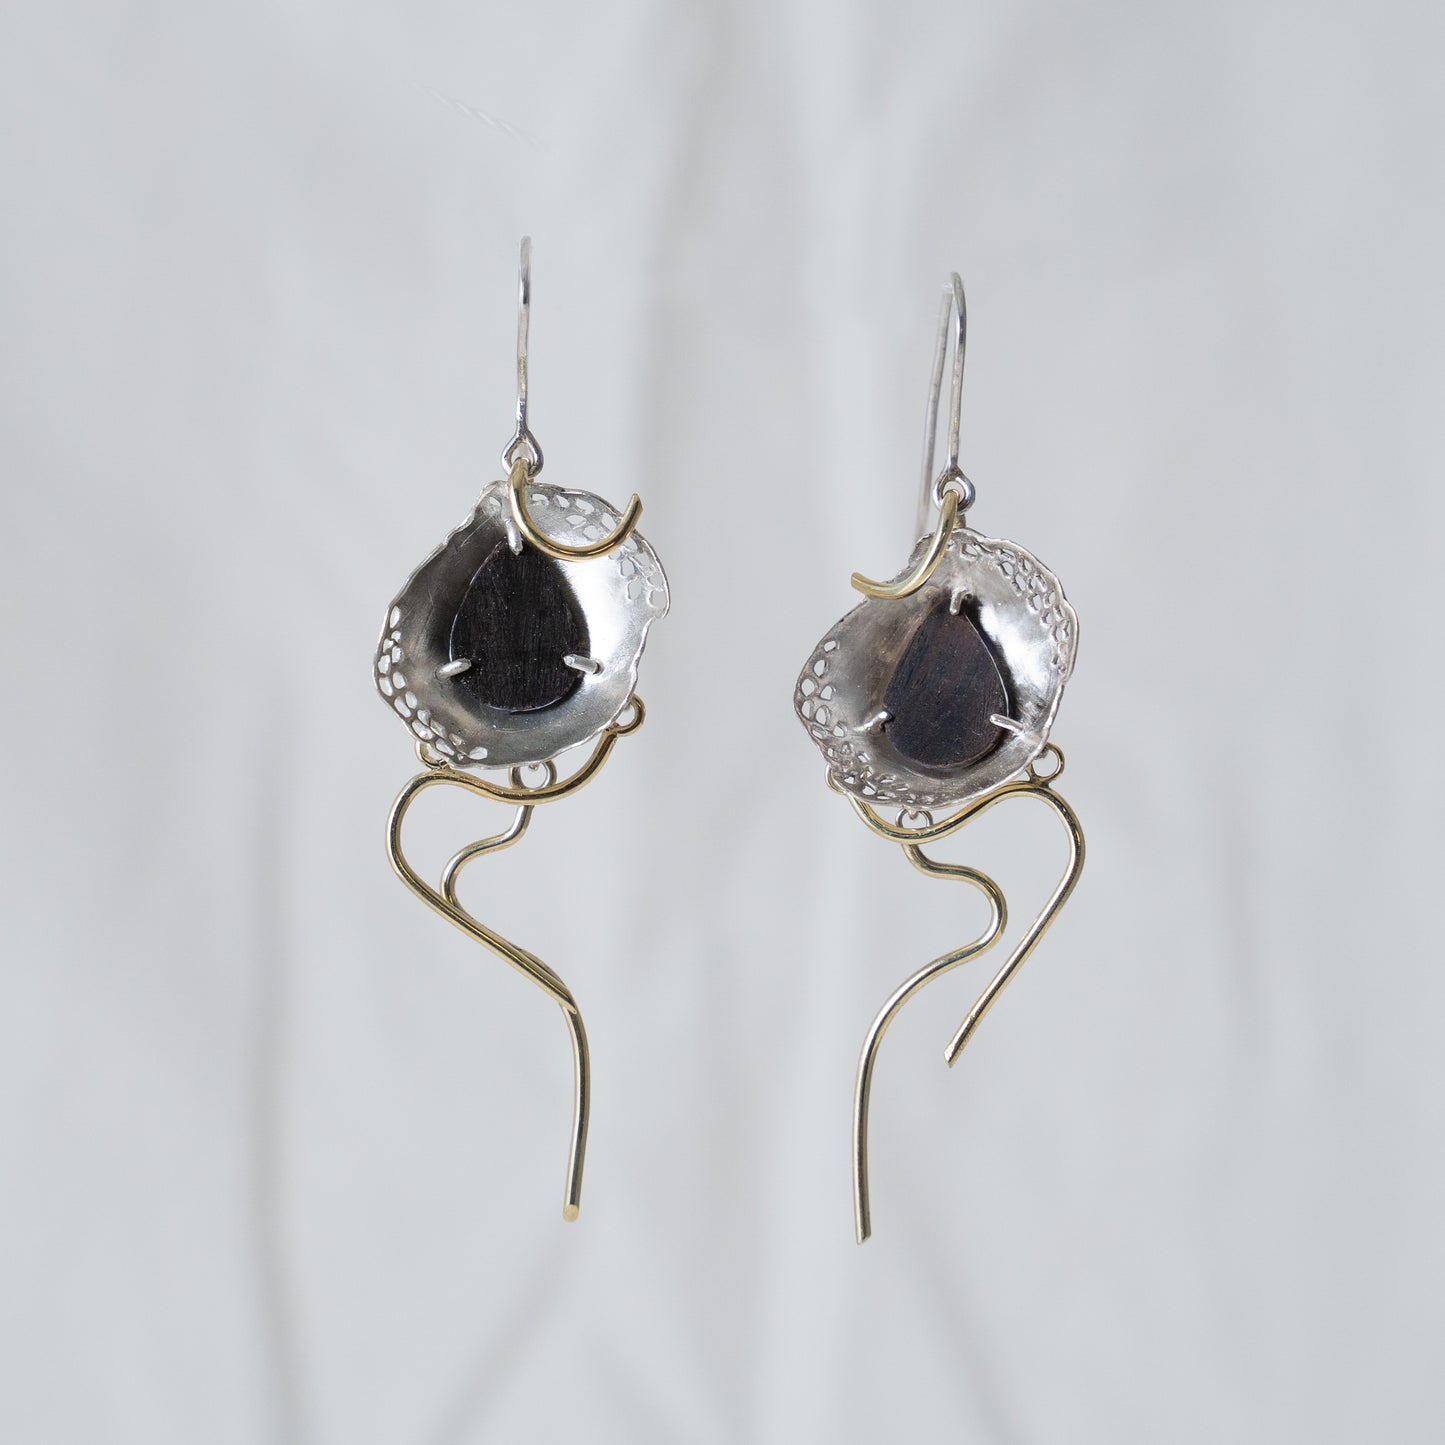 Hiding beneath the flowers, hand fabricated 14k yellow gold with ebony wood hand set in sterling silver dangle earrings